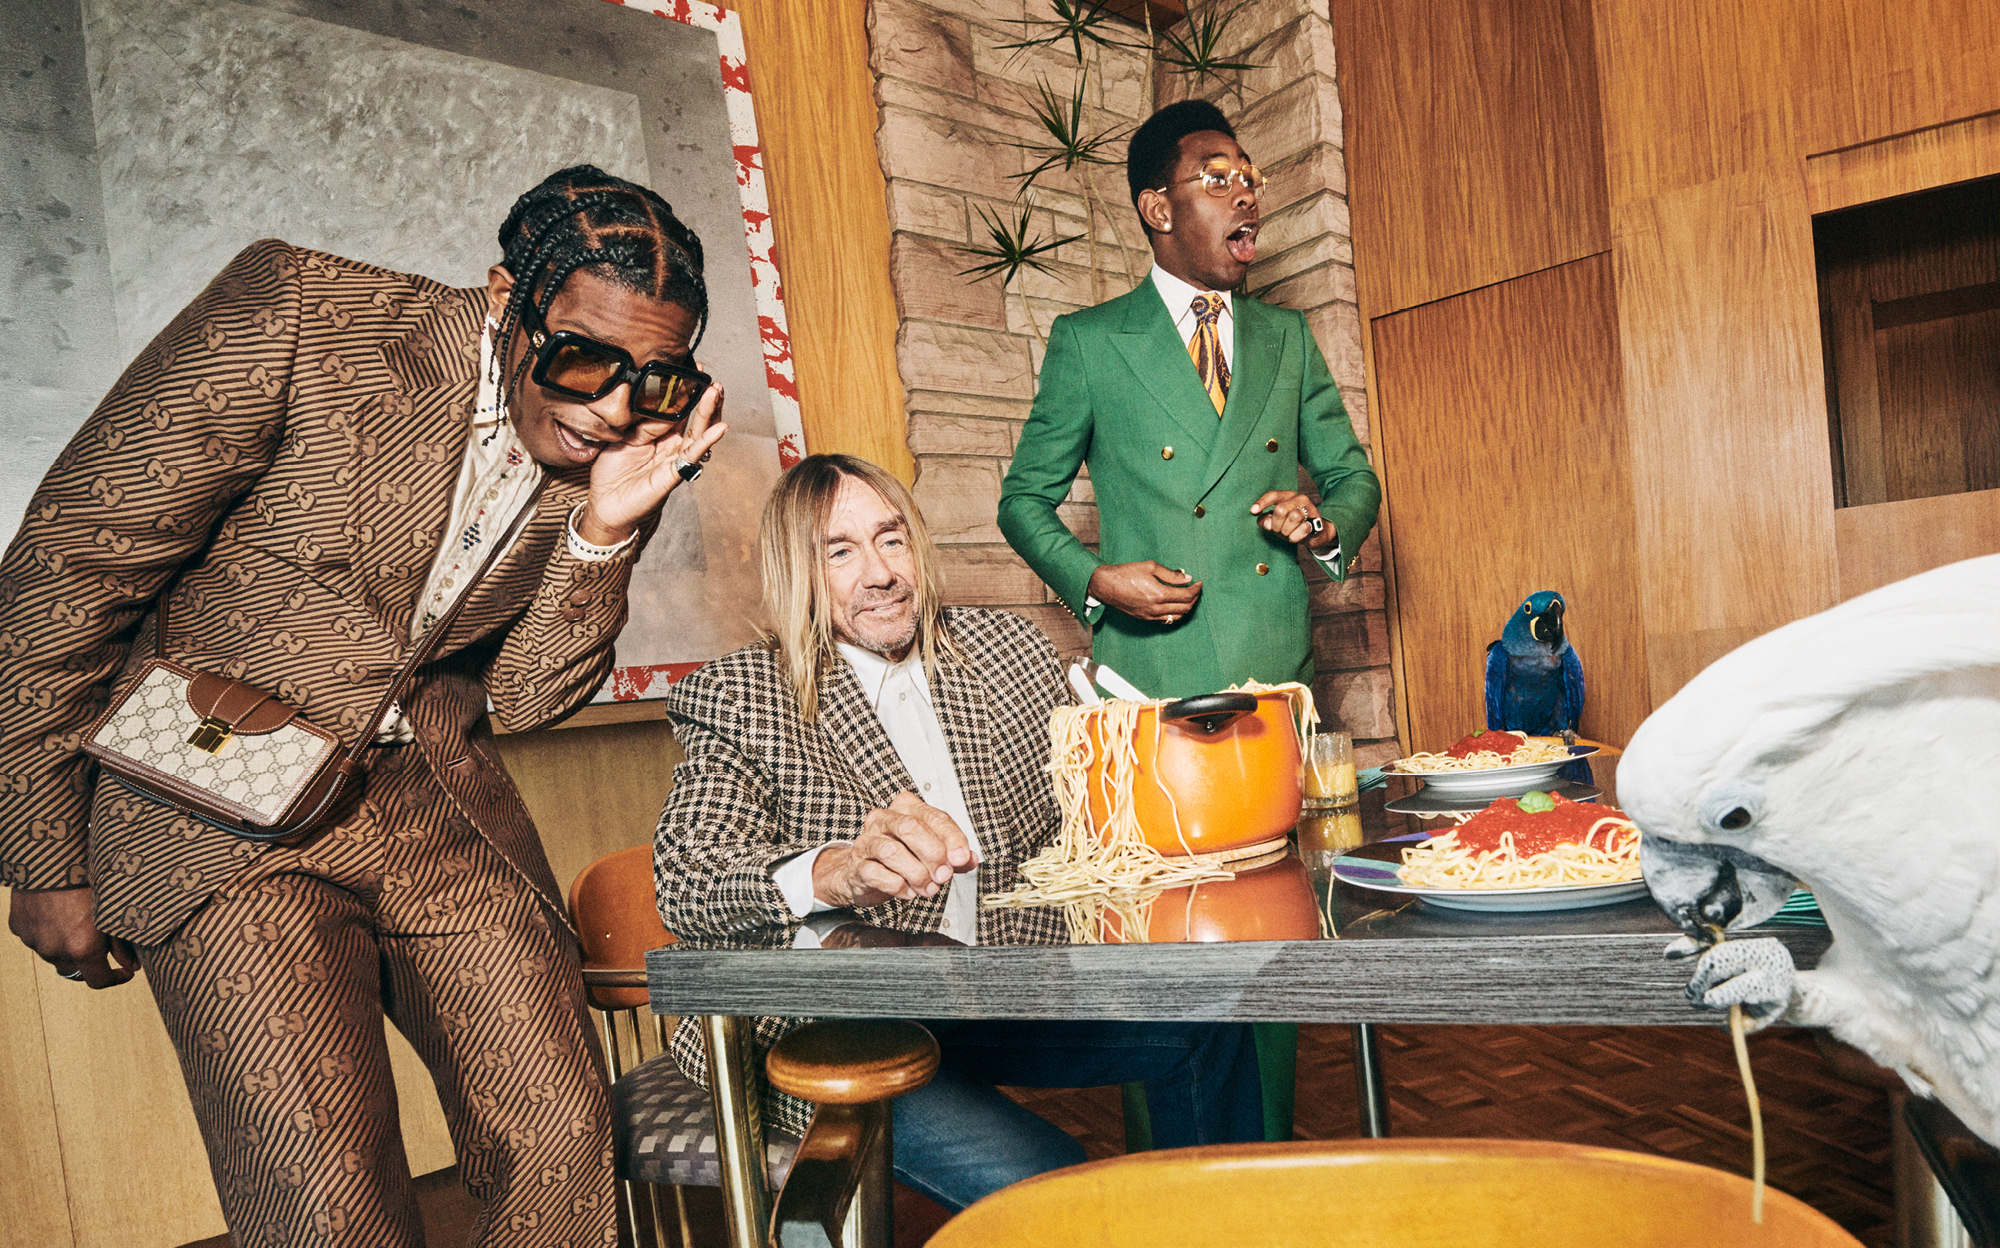 Gucci's new men's tailoring campaign